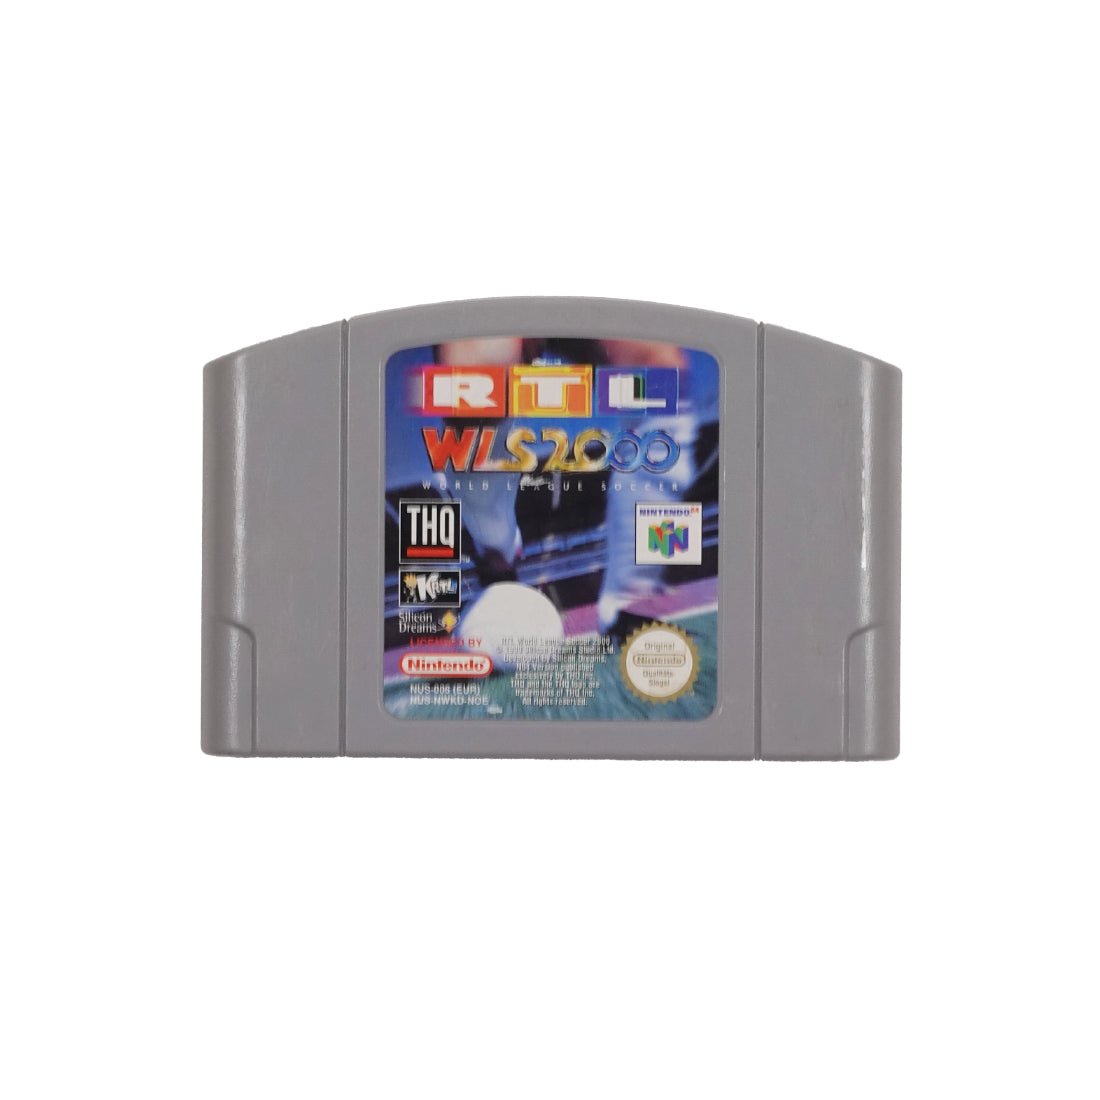 (Pre-Owned) WLS 2000 - Nintendo 64 - Store 974 | ستور ٩٧٤